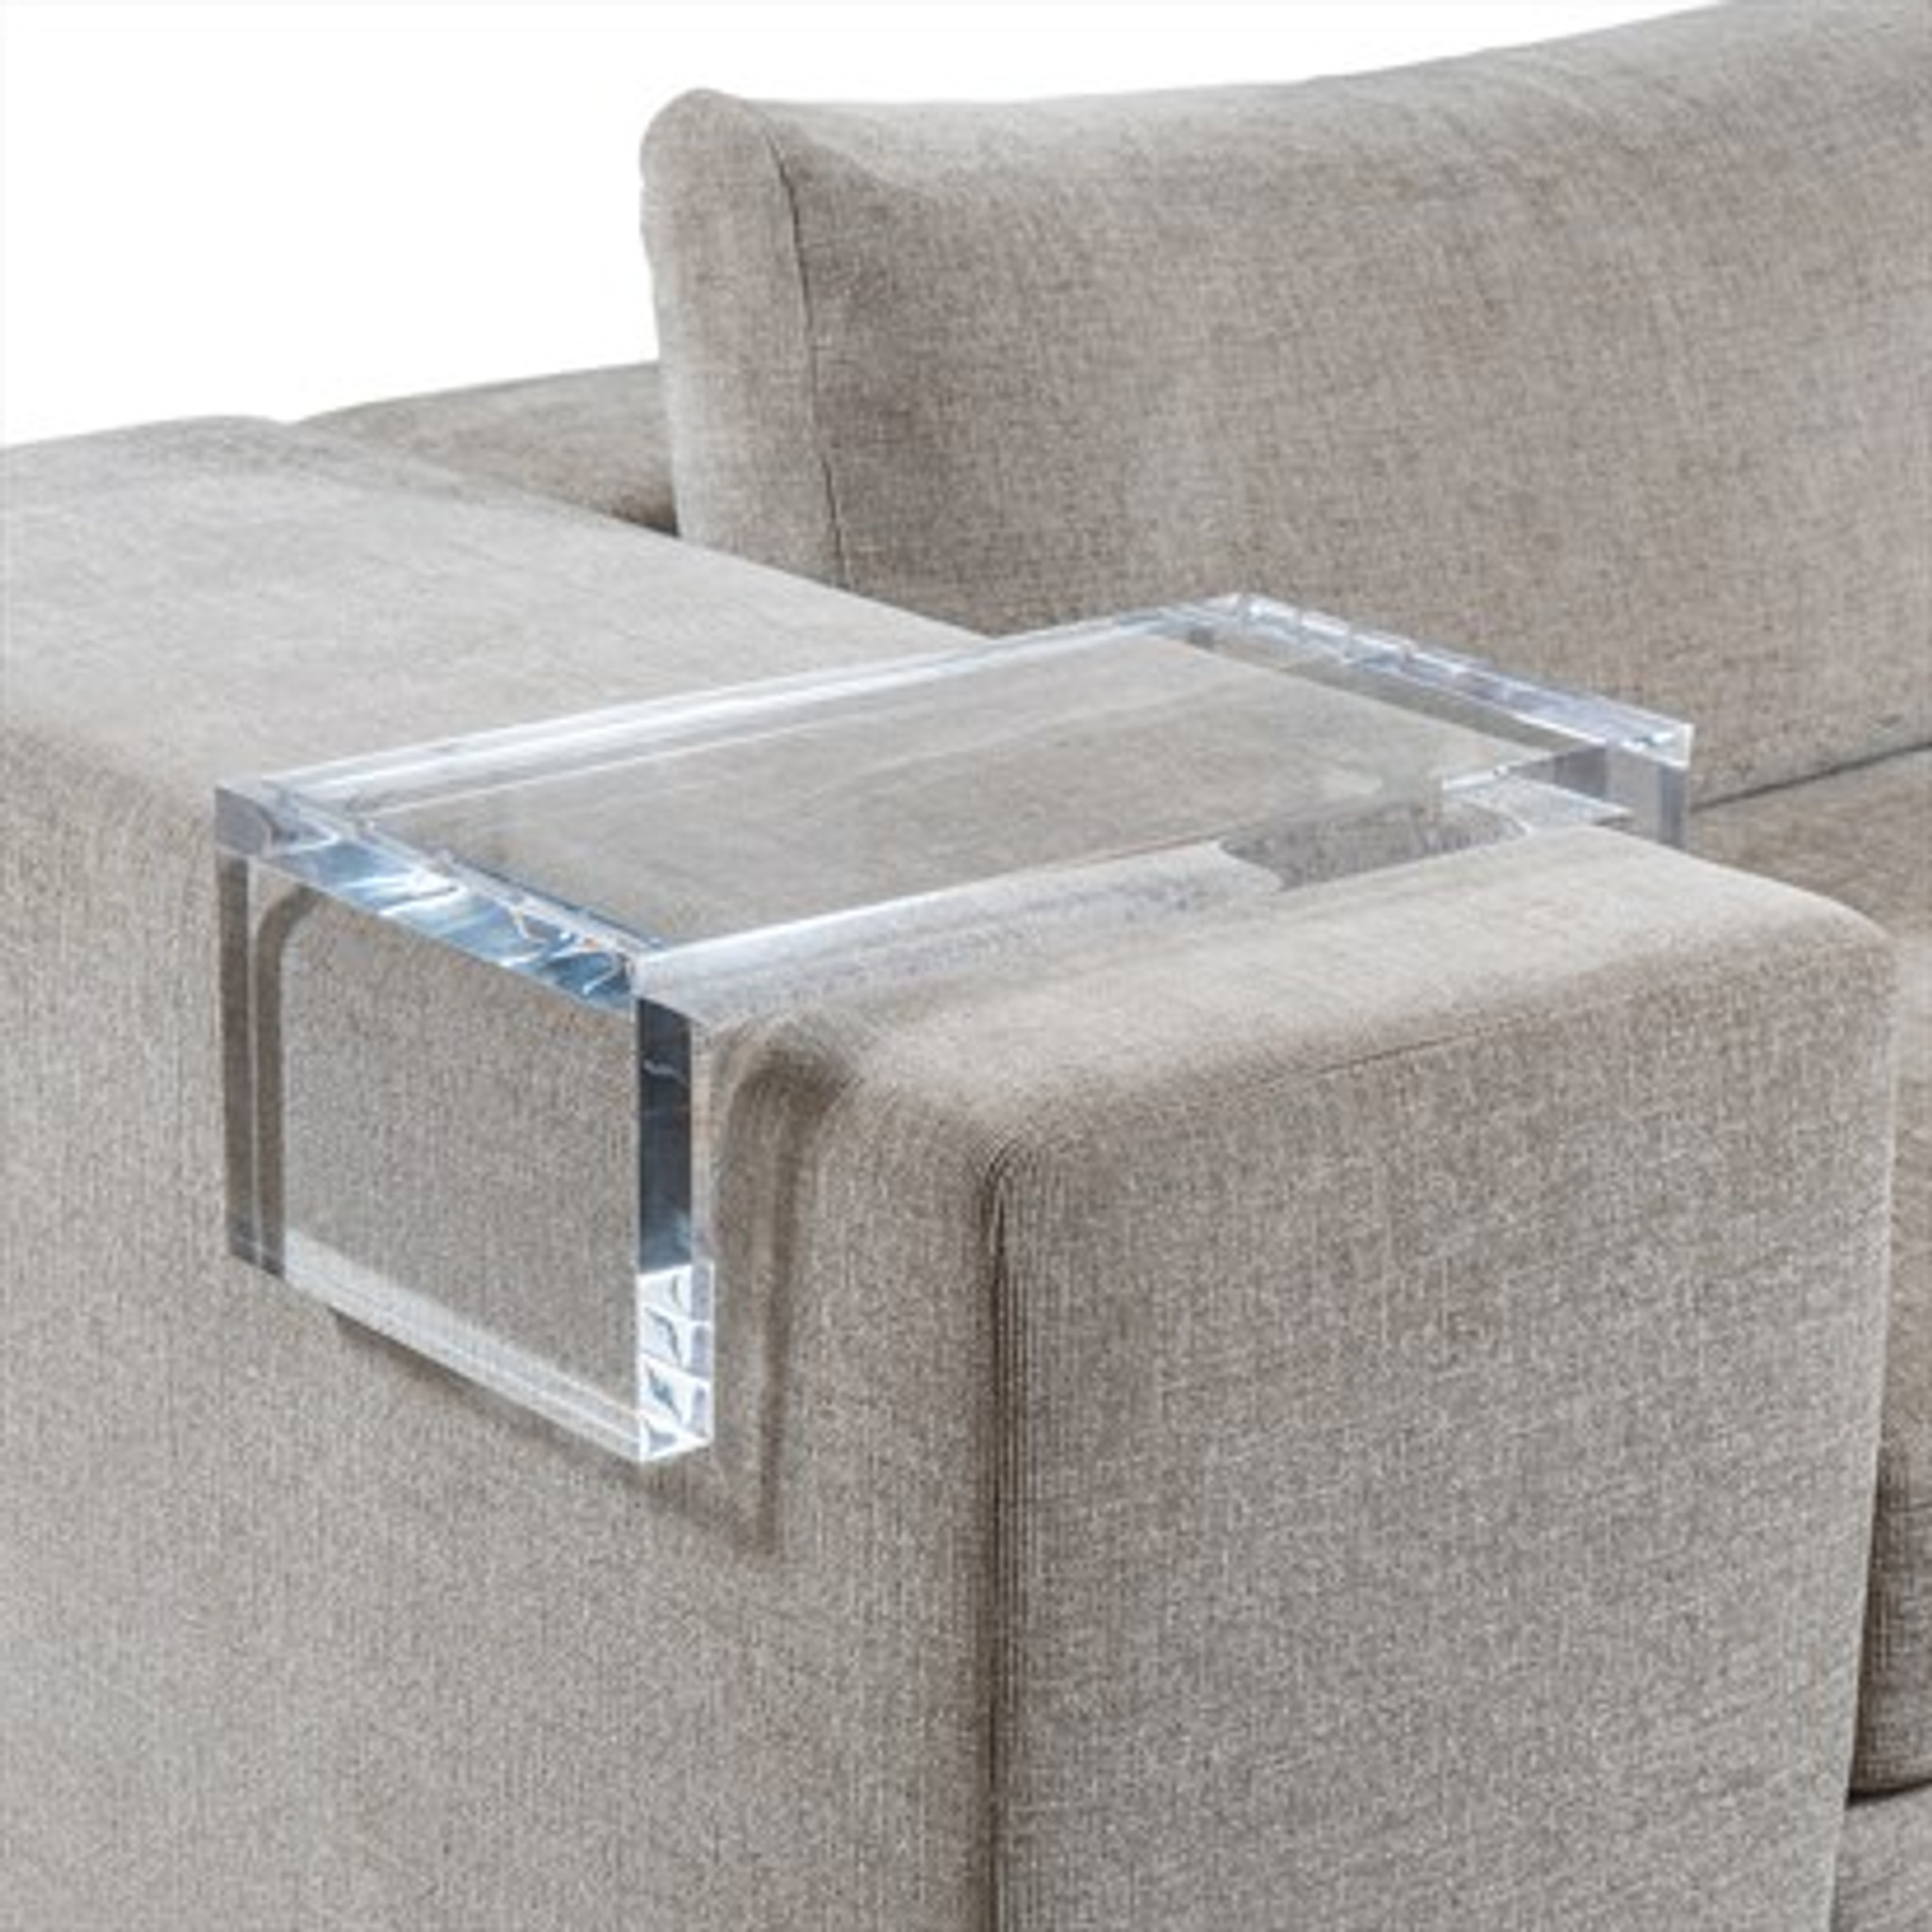 Clear Acrylic Armrest Tray For Drink or Phone